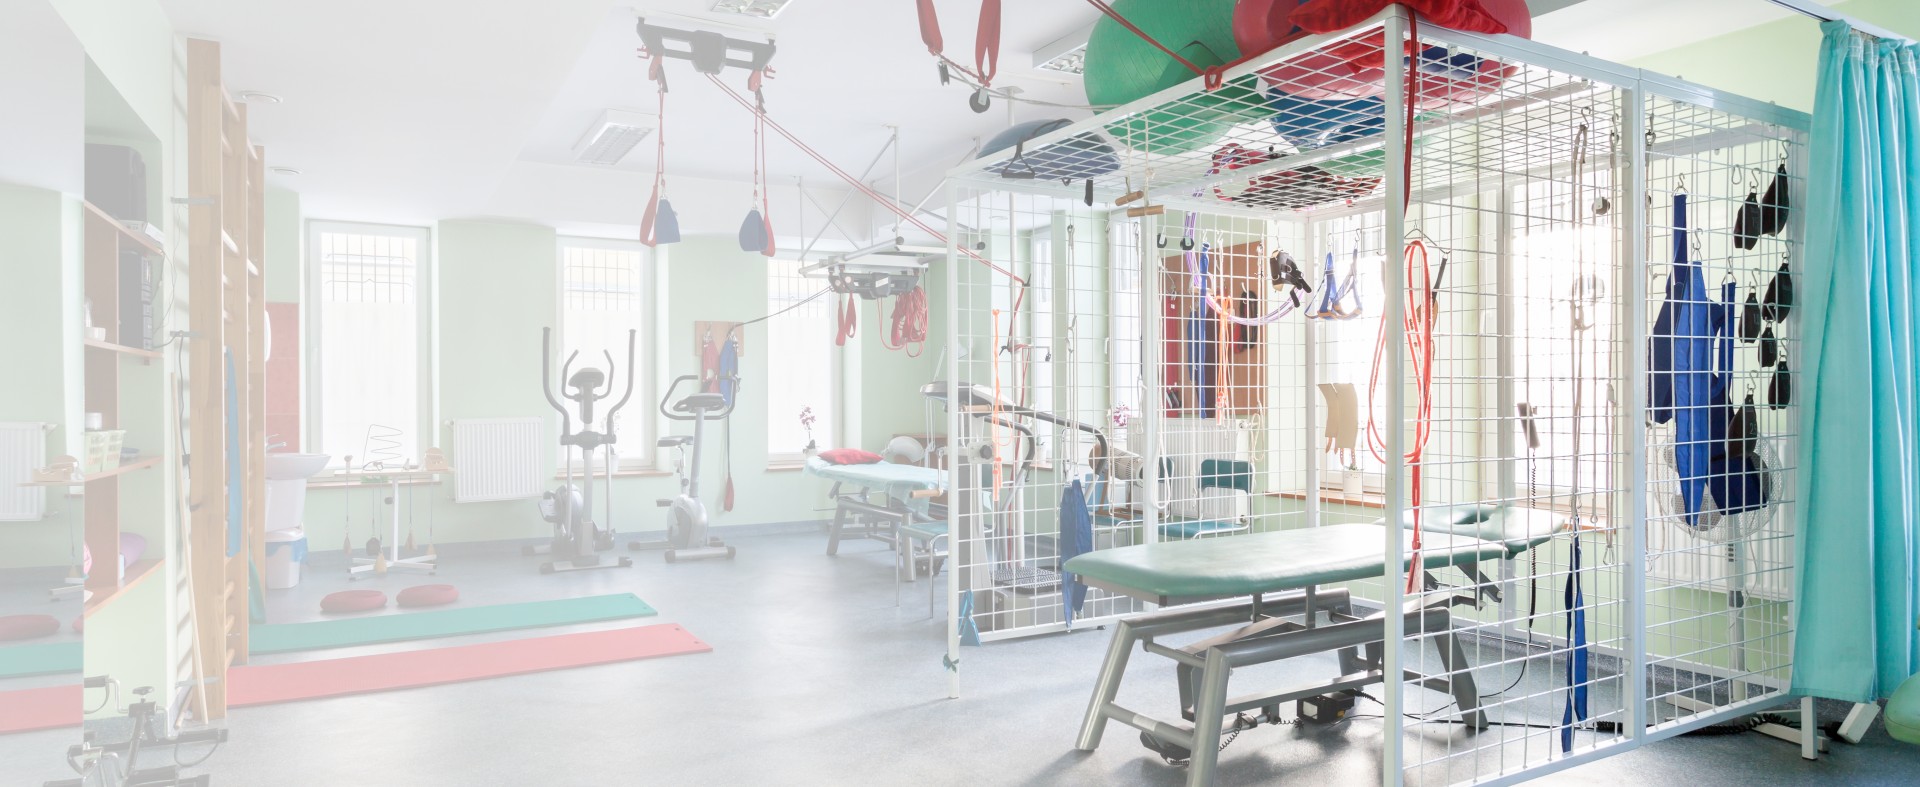 Professional and multidisciplinary team, innovative rehabilitation techniques and friendly environment.